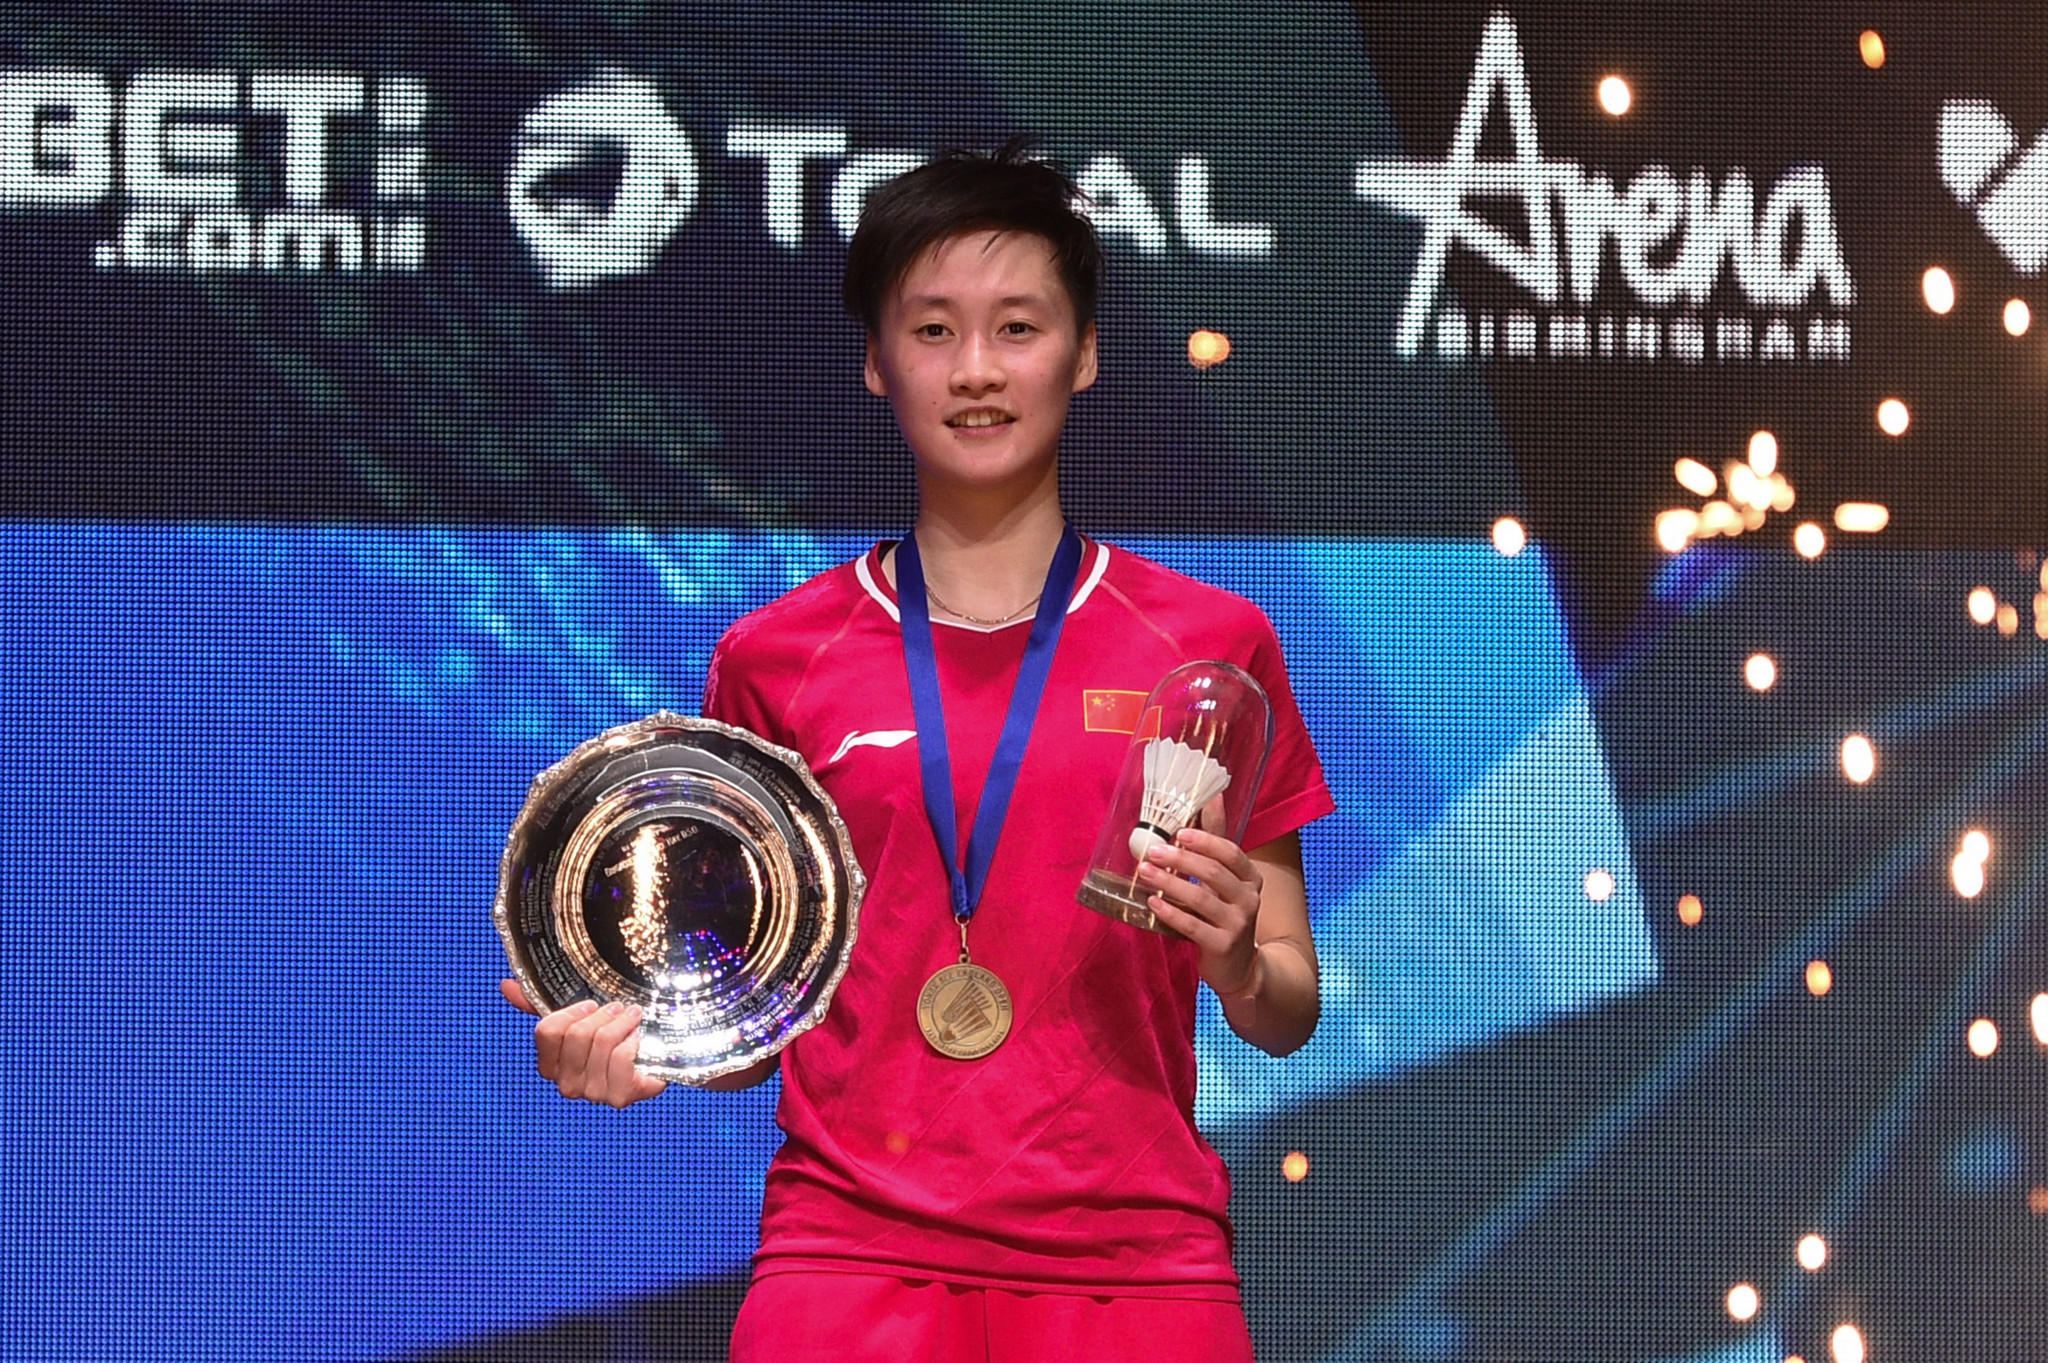 Chen continues strong form with Swiss Open victory in Basel 